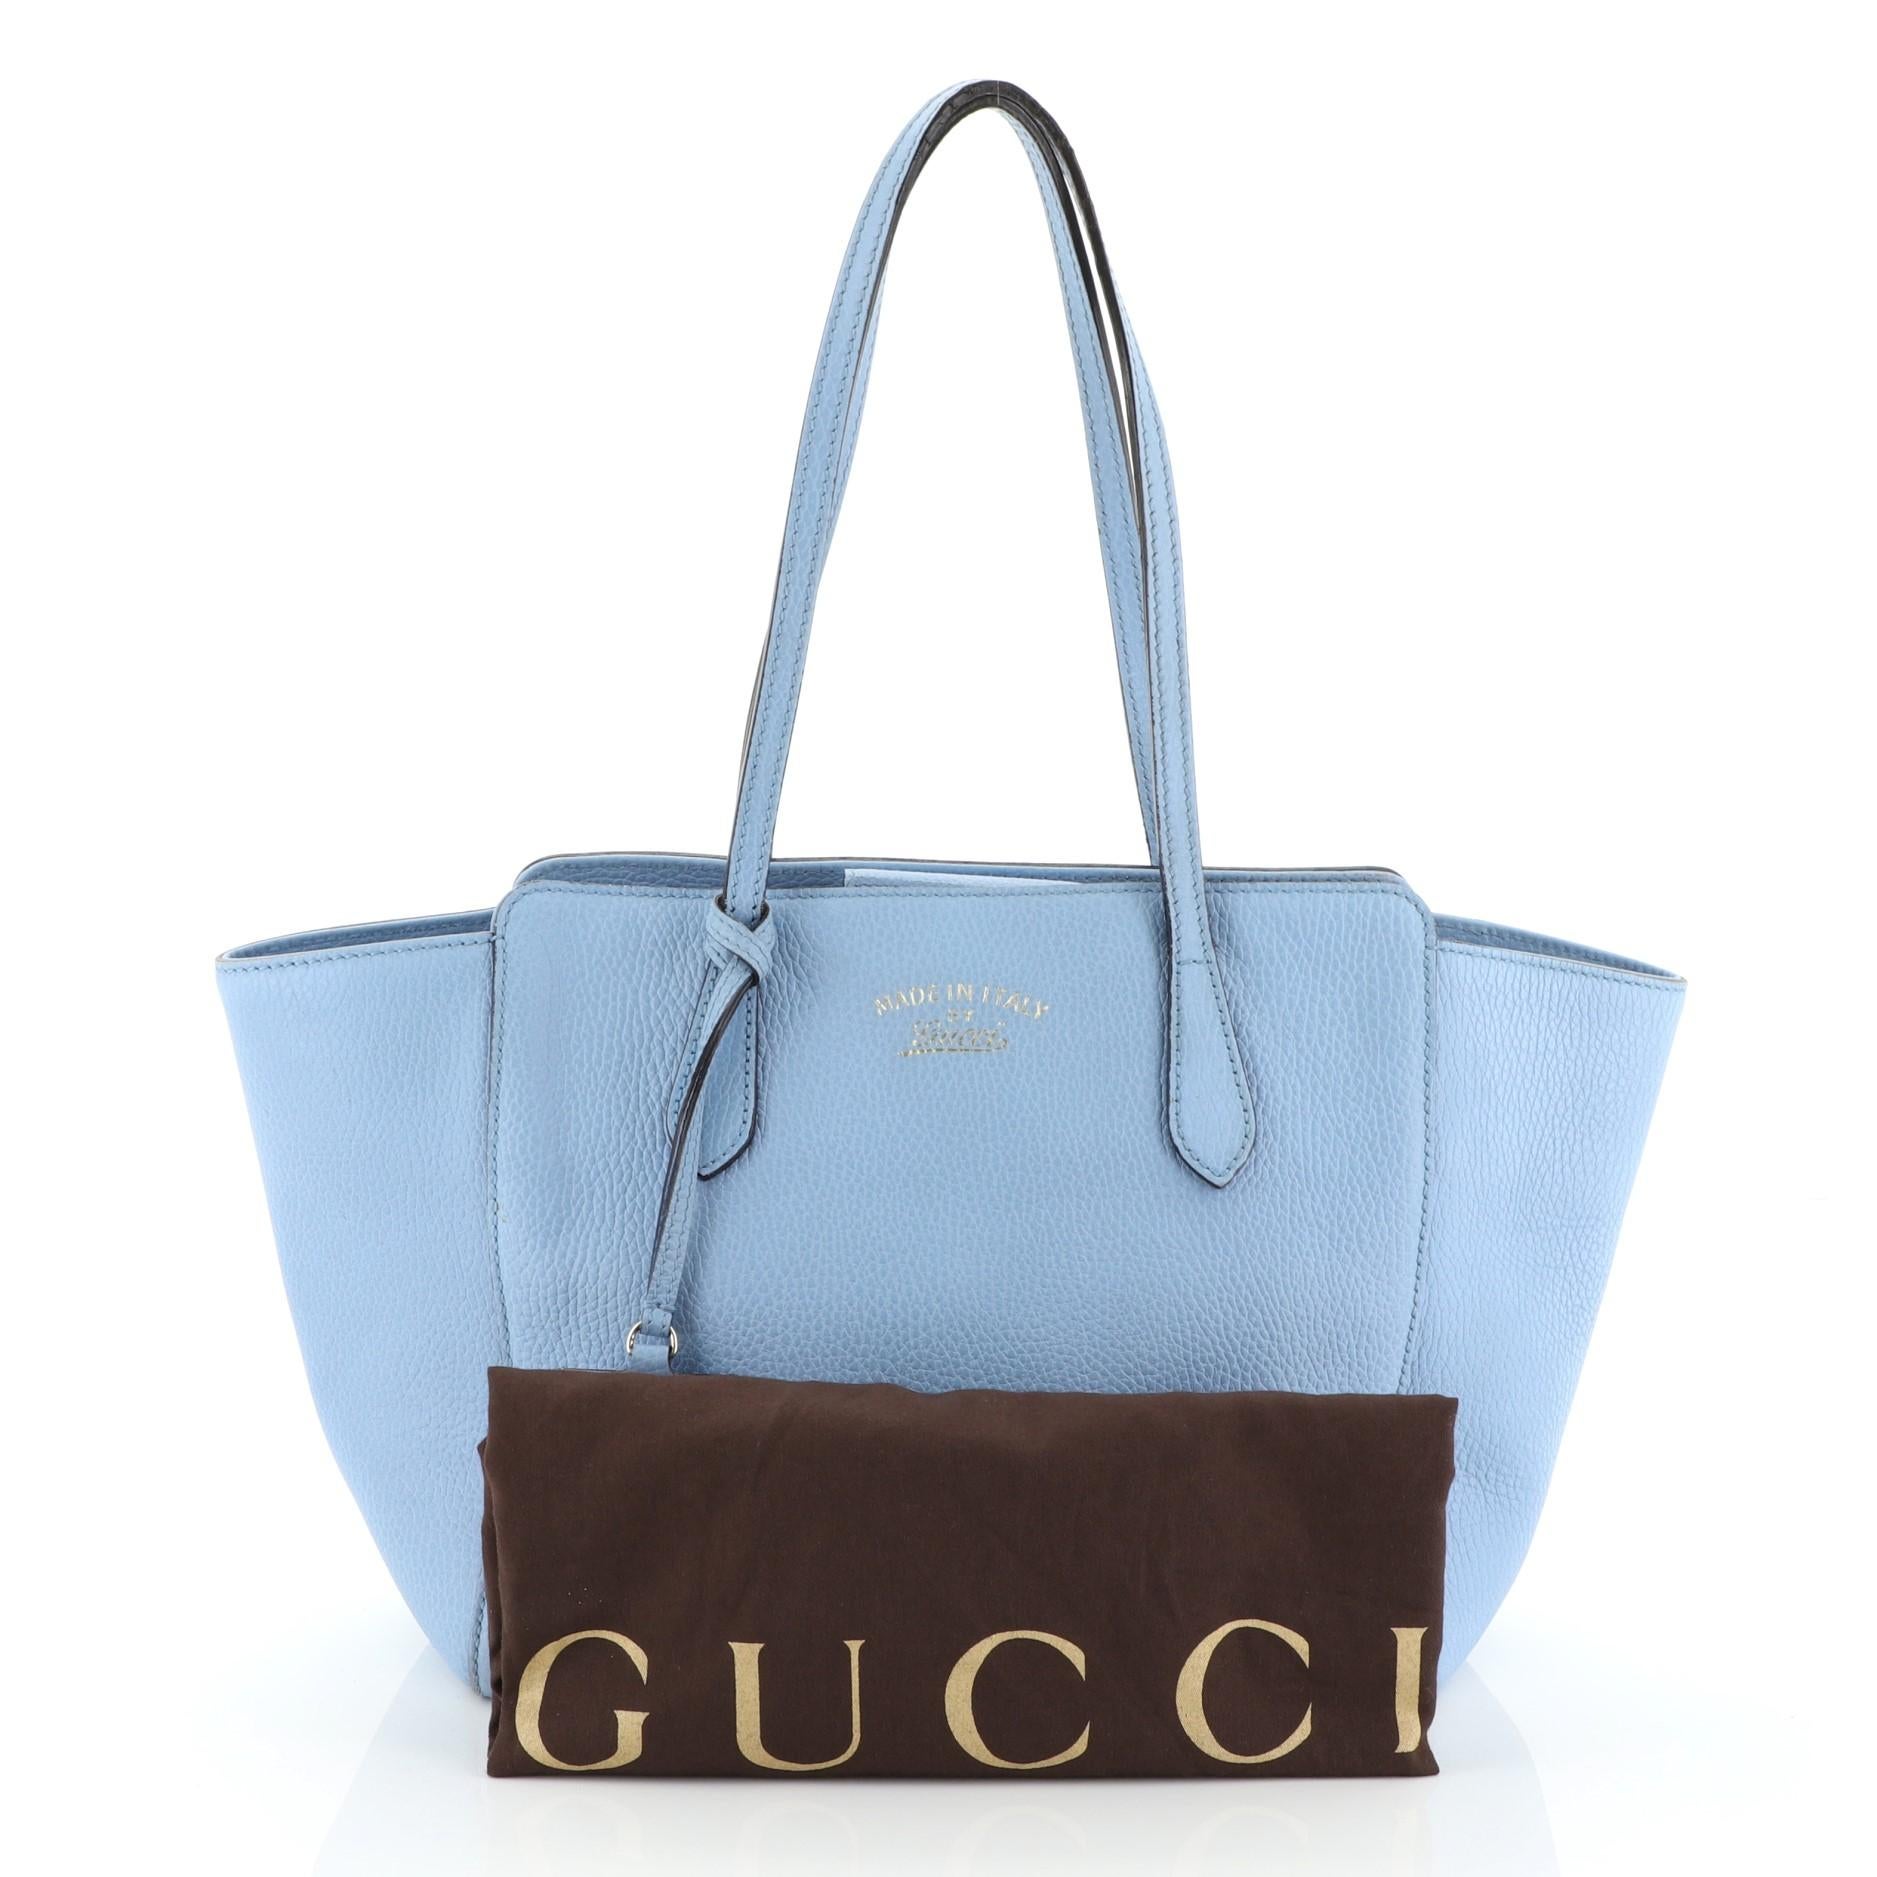 This Gucci Swing Tote Leather Small, crafted in blue leather, features dual slim handles, Gucci stamped logo at the front and gold-tone hardware. Its hidden magnetic snap closure opens to a neutral fabric interior with zip and slip pockets.